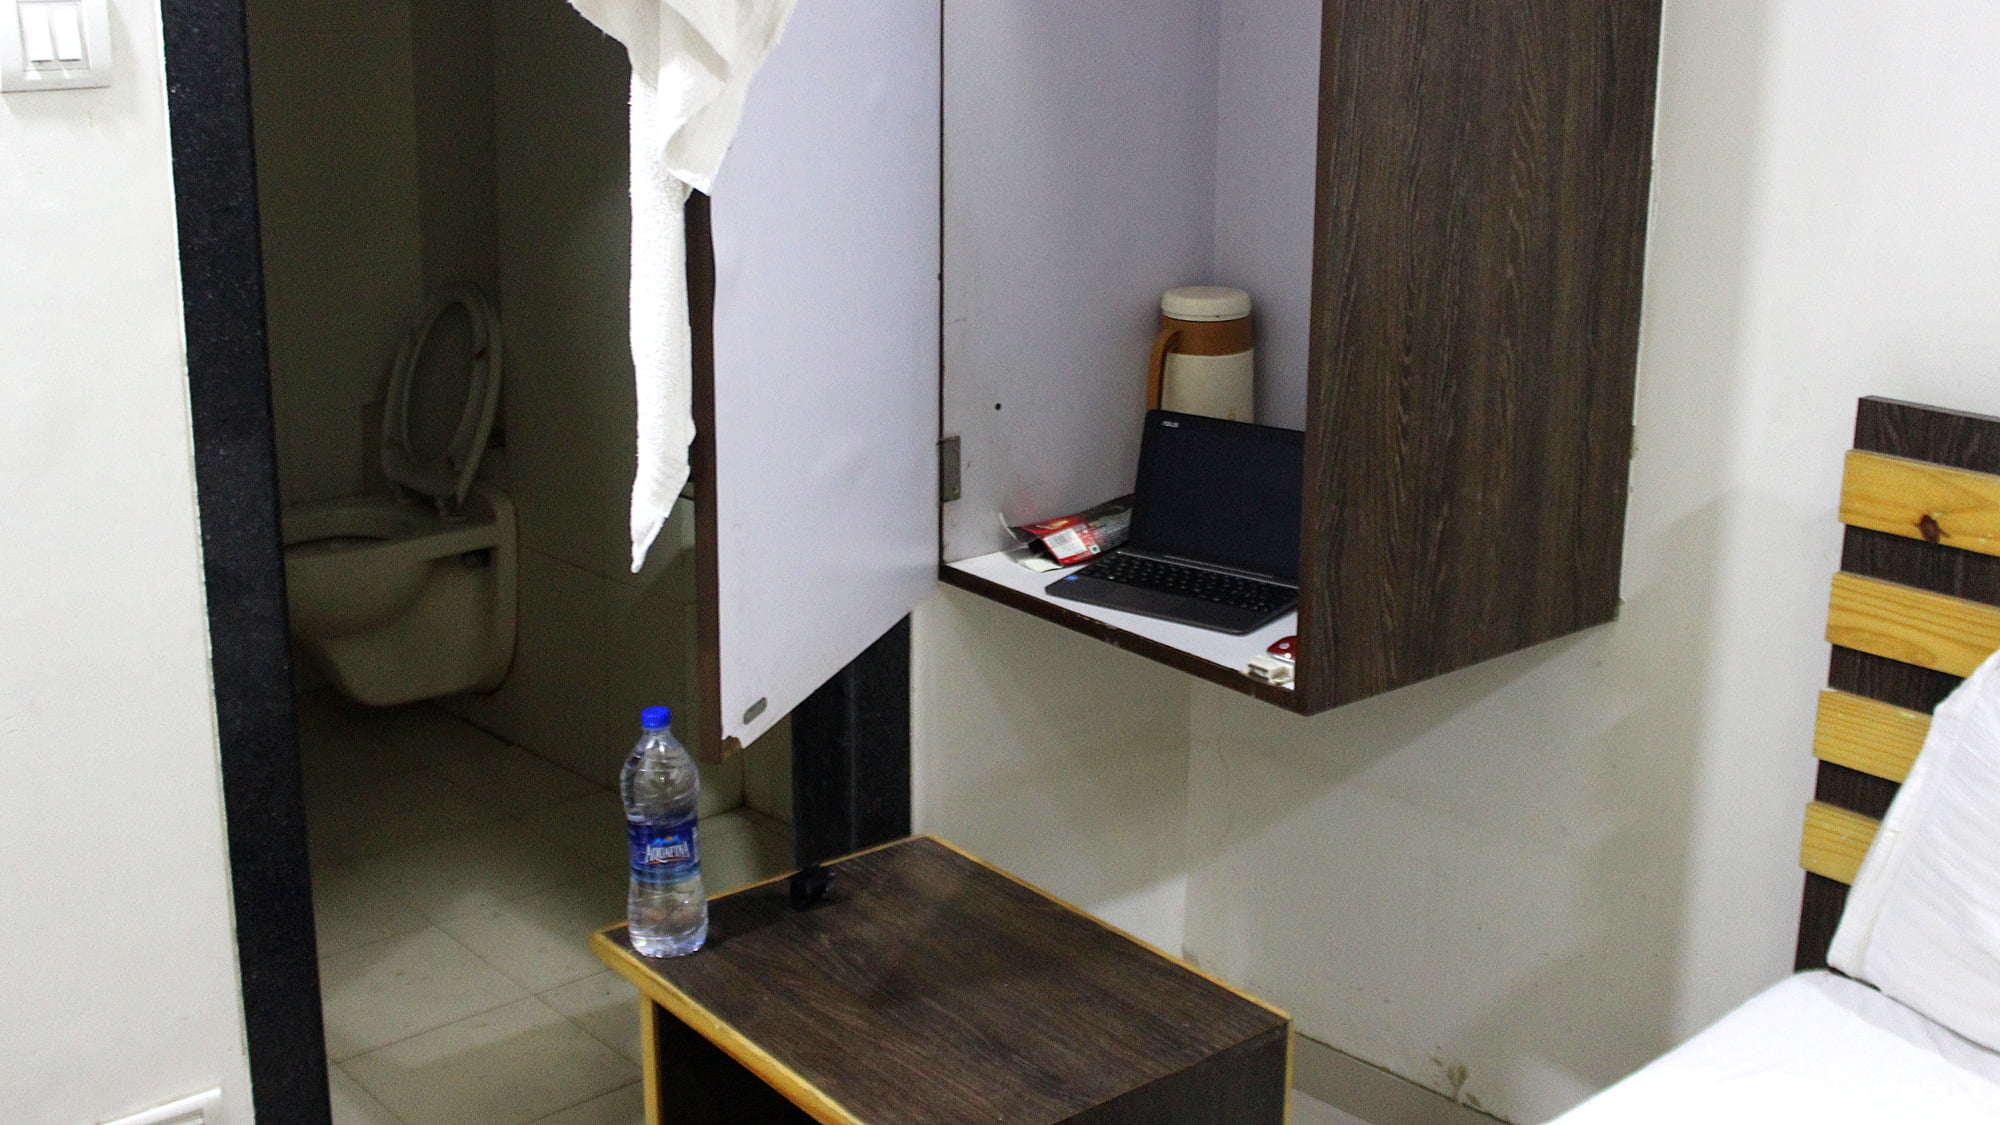 An improvised desk with laptop on a locker and hotel room nightstand used as a chair.